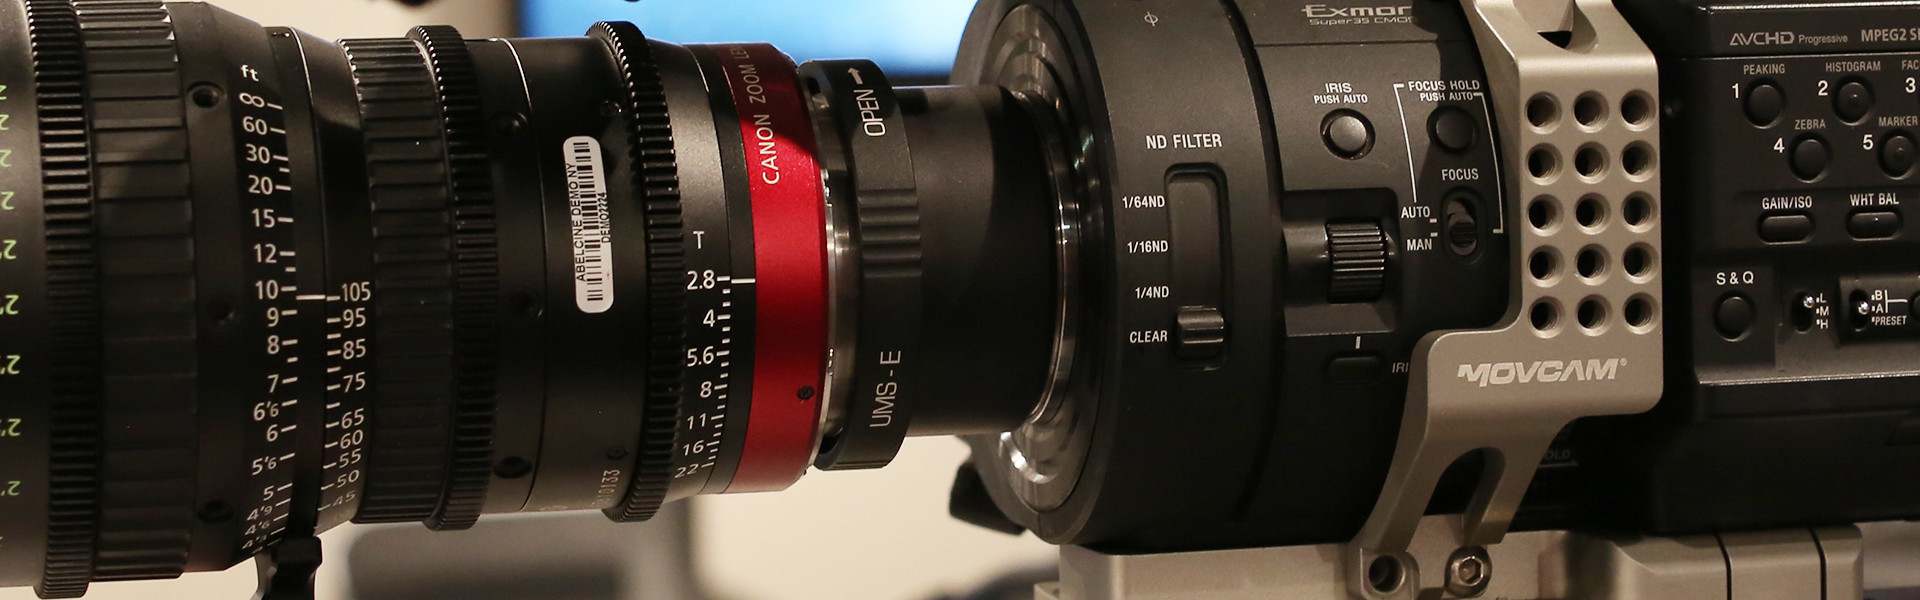 Header image for article Quickly Swap Lens Mounts on Your Canon Cinema Zooms